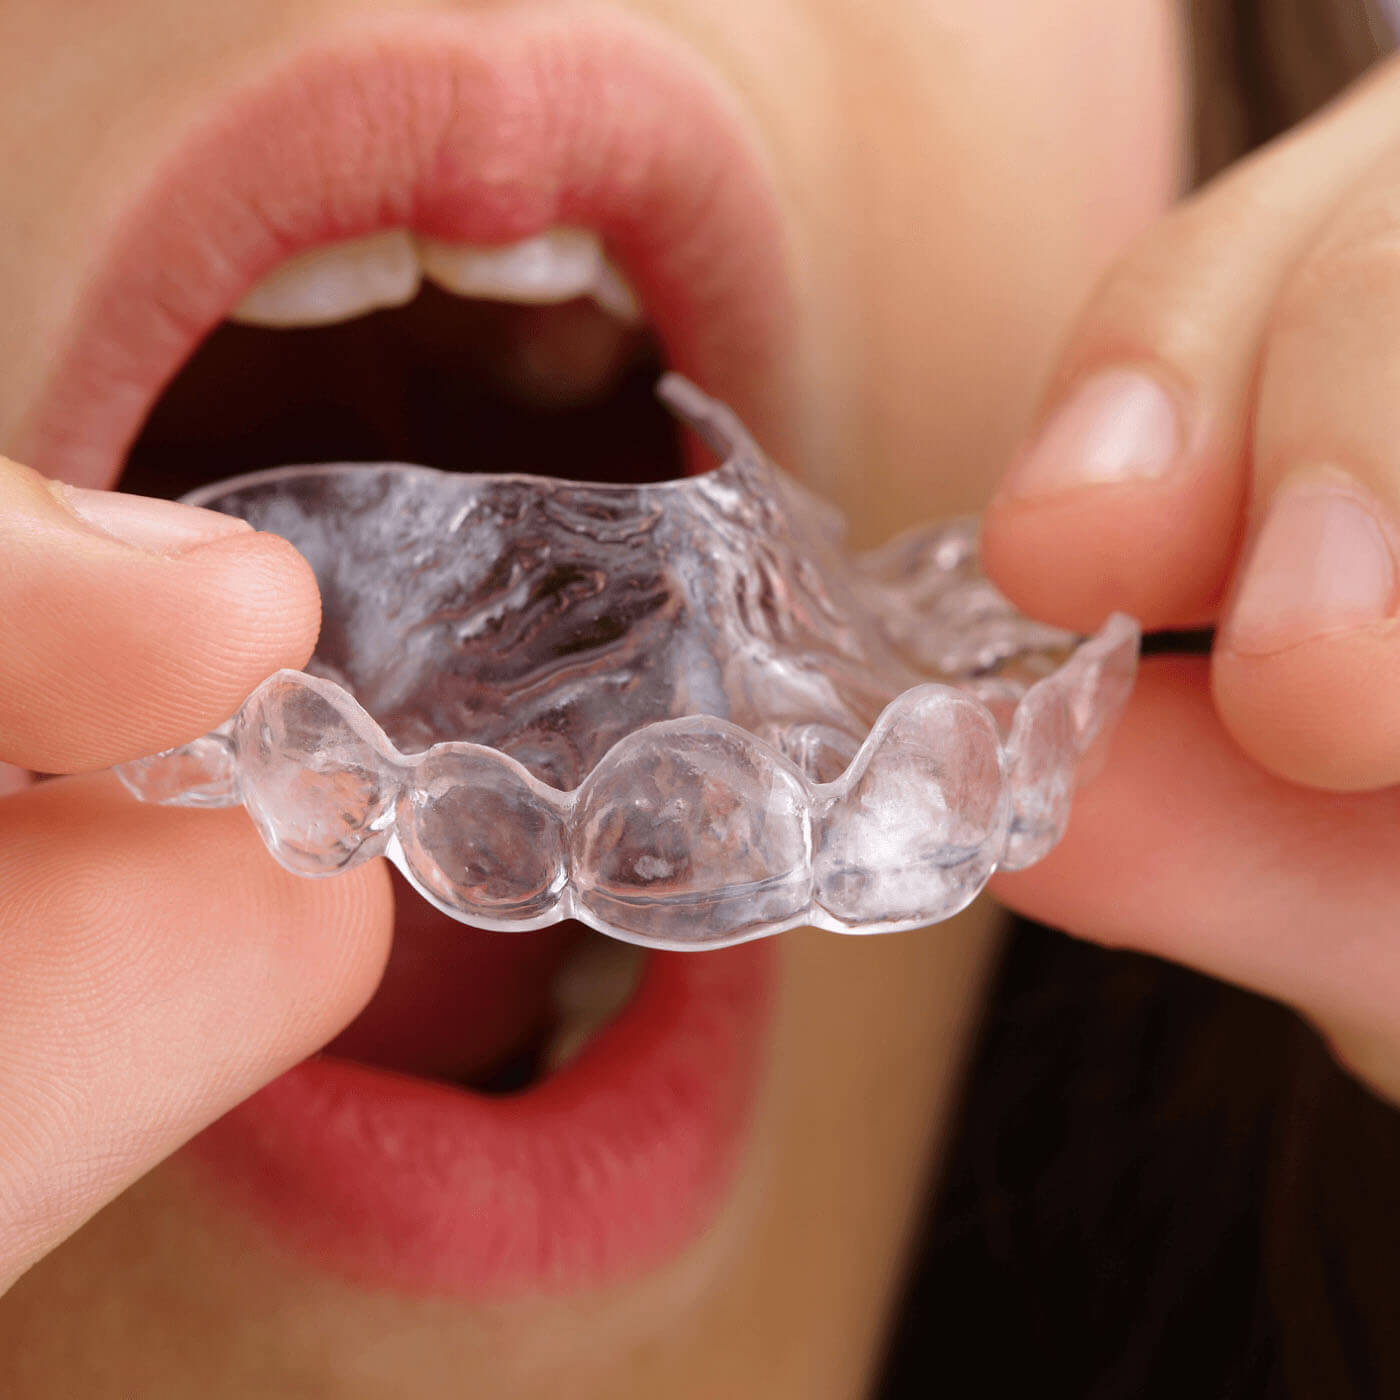 Should My Child Get Braces or Invisalign?